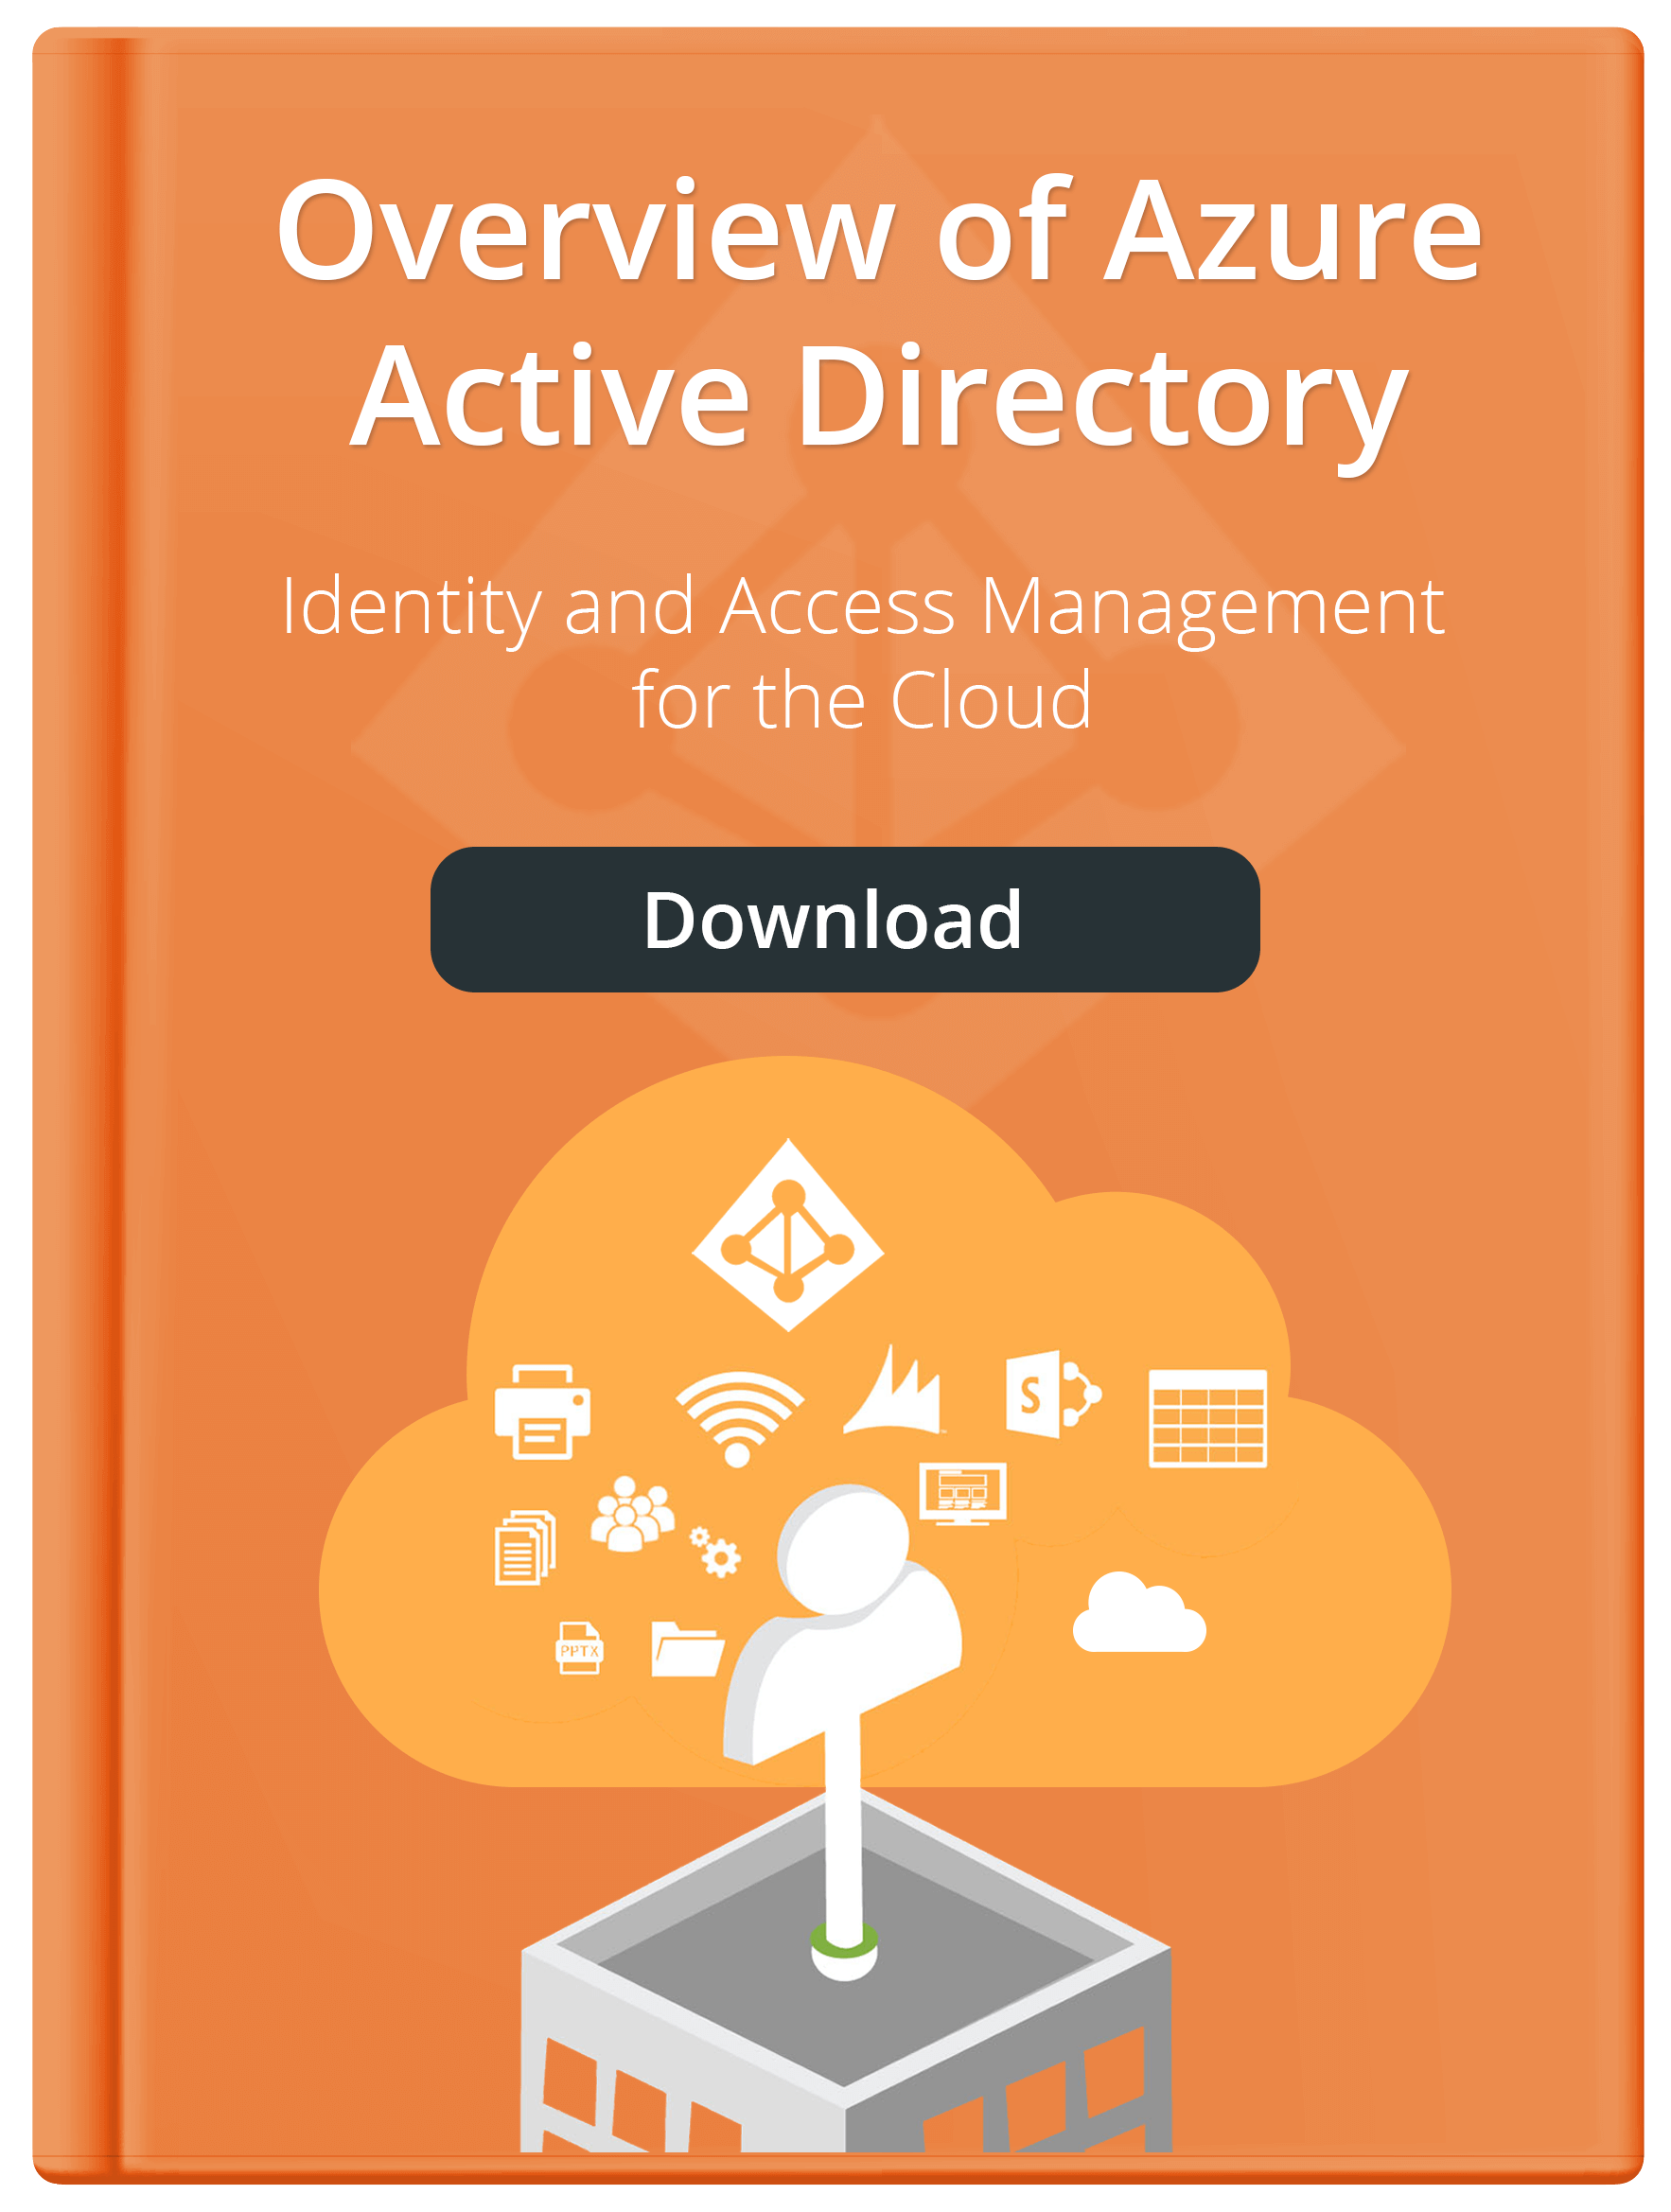 Overview of Azure Active Directory